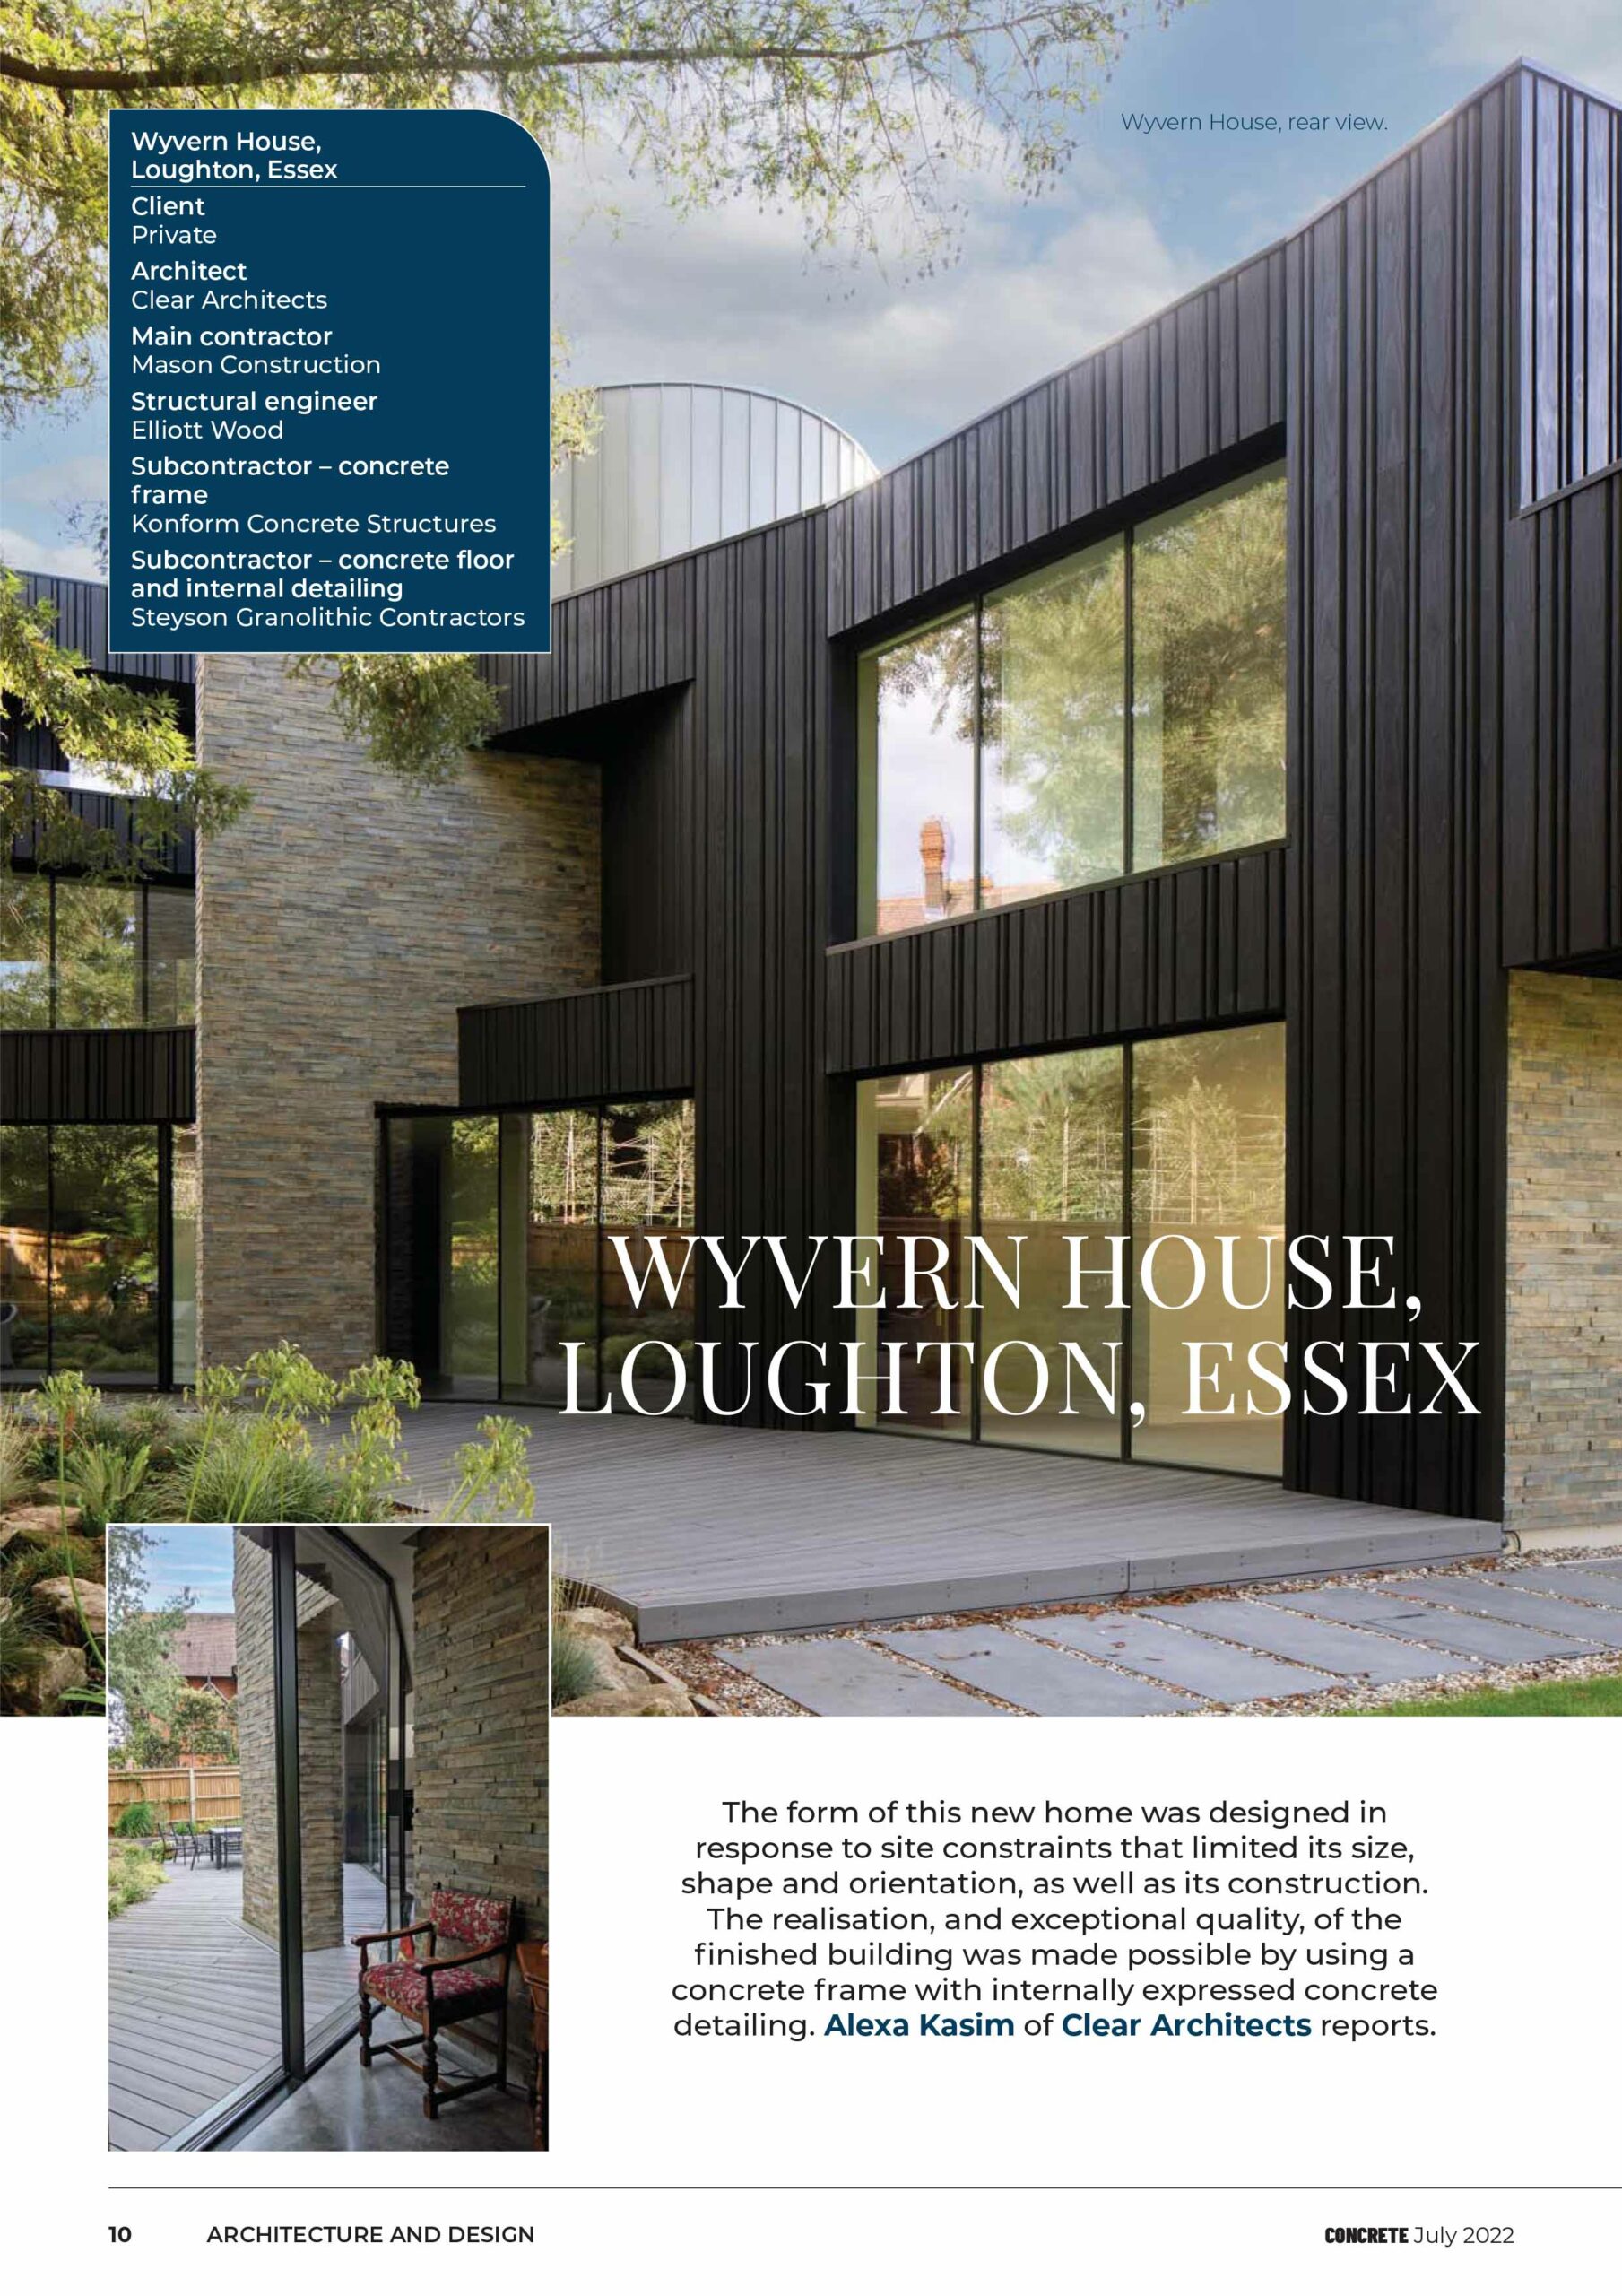 Concrete Magazine: Wyvern House | Clear Architects - Planners